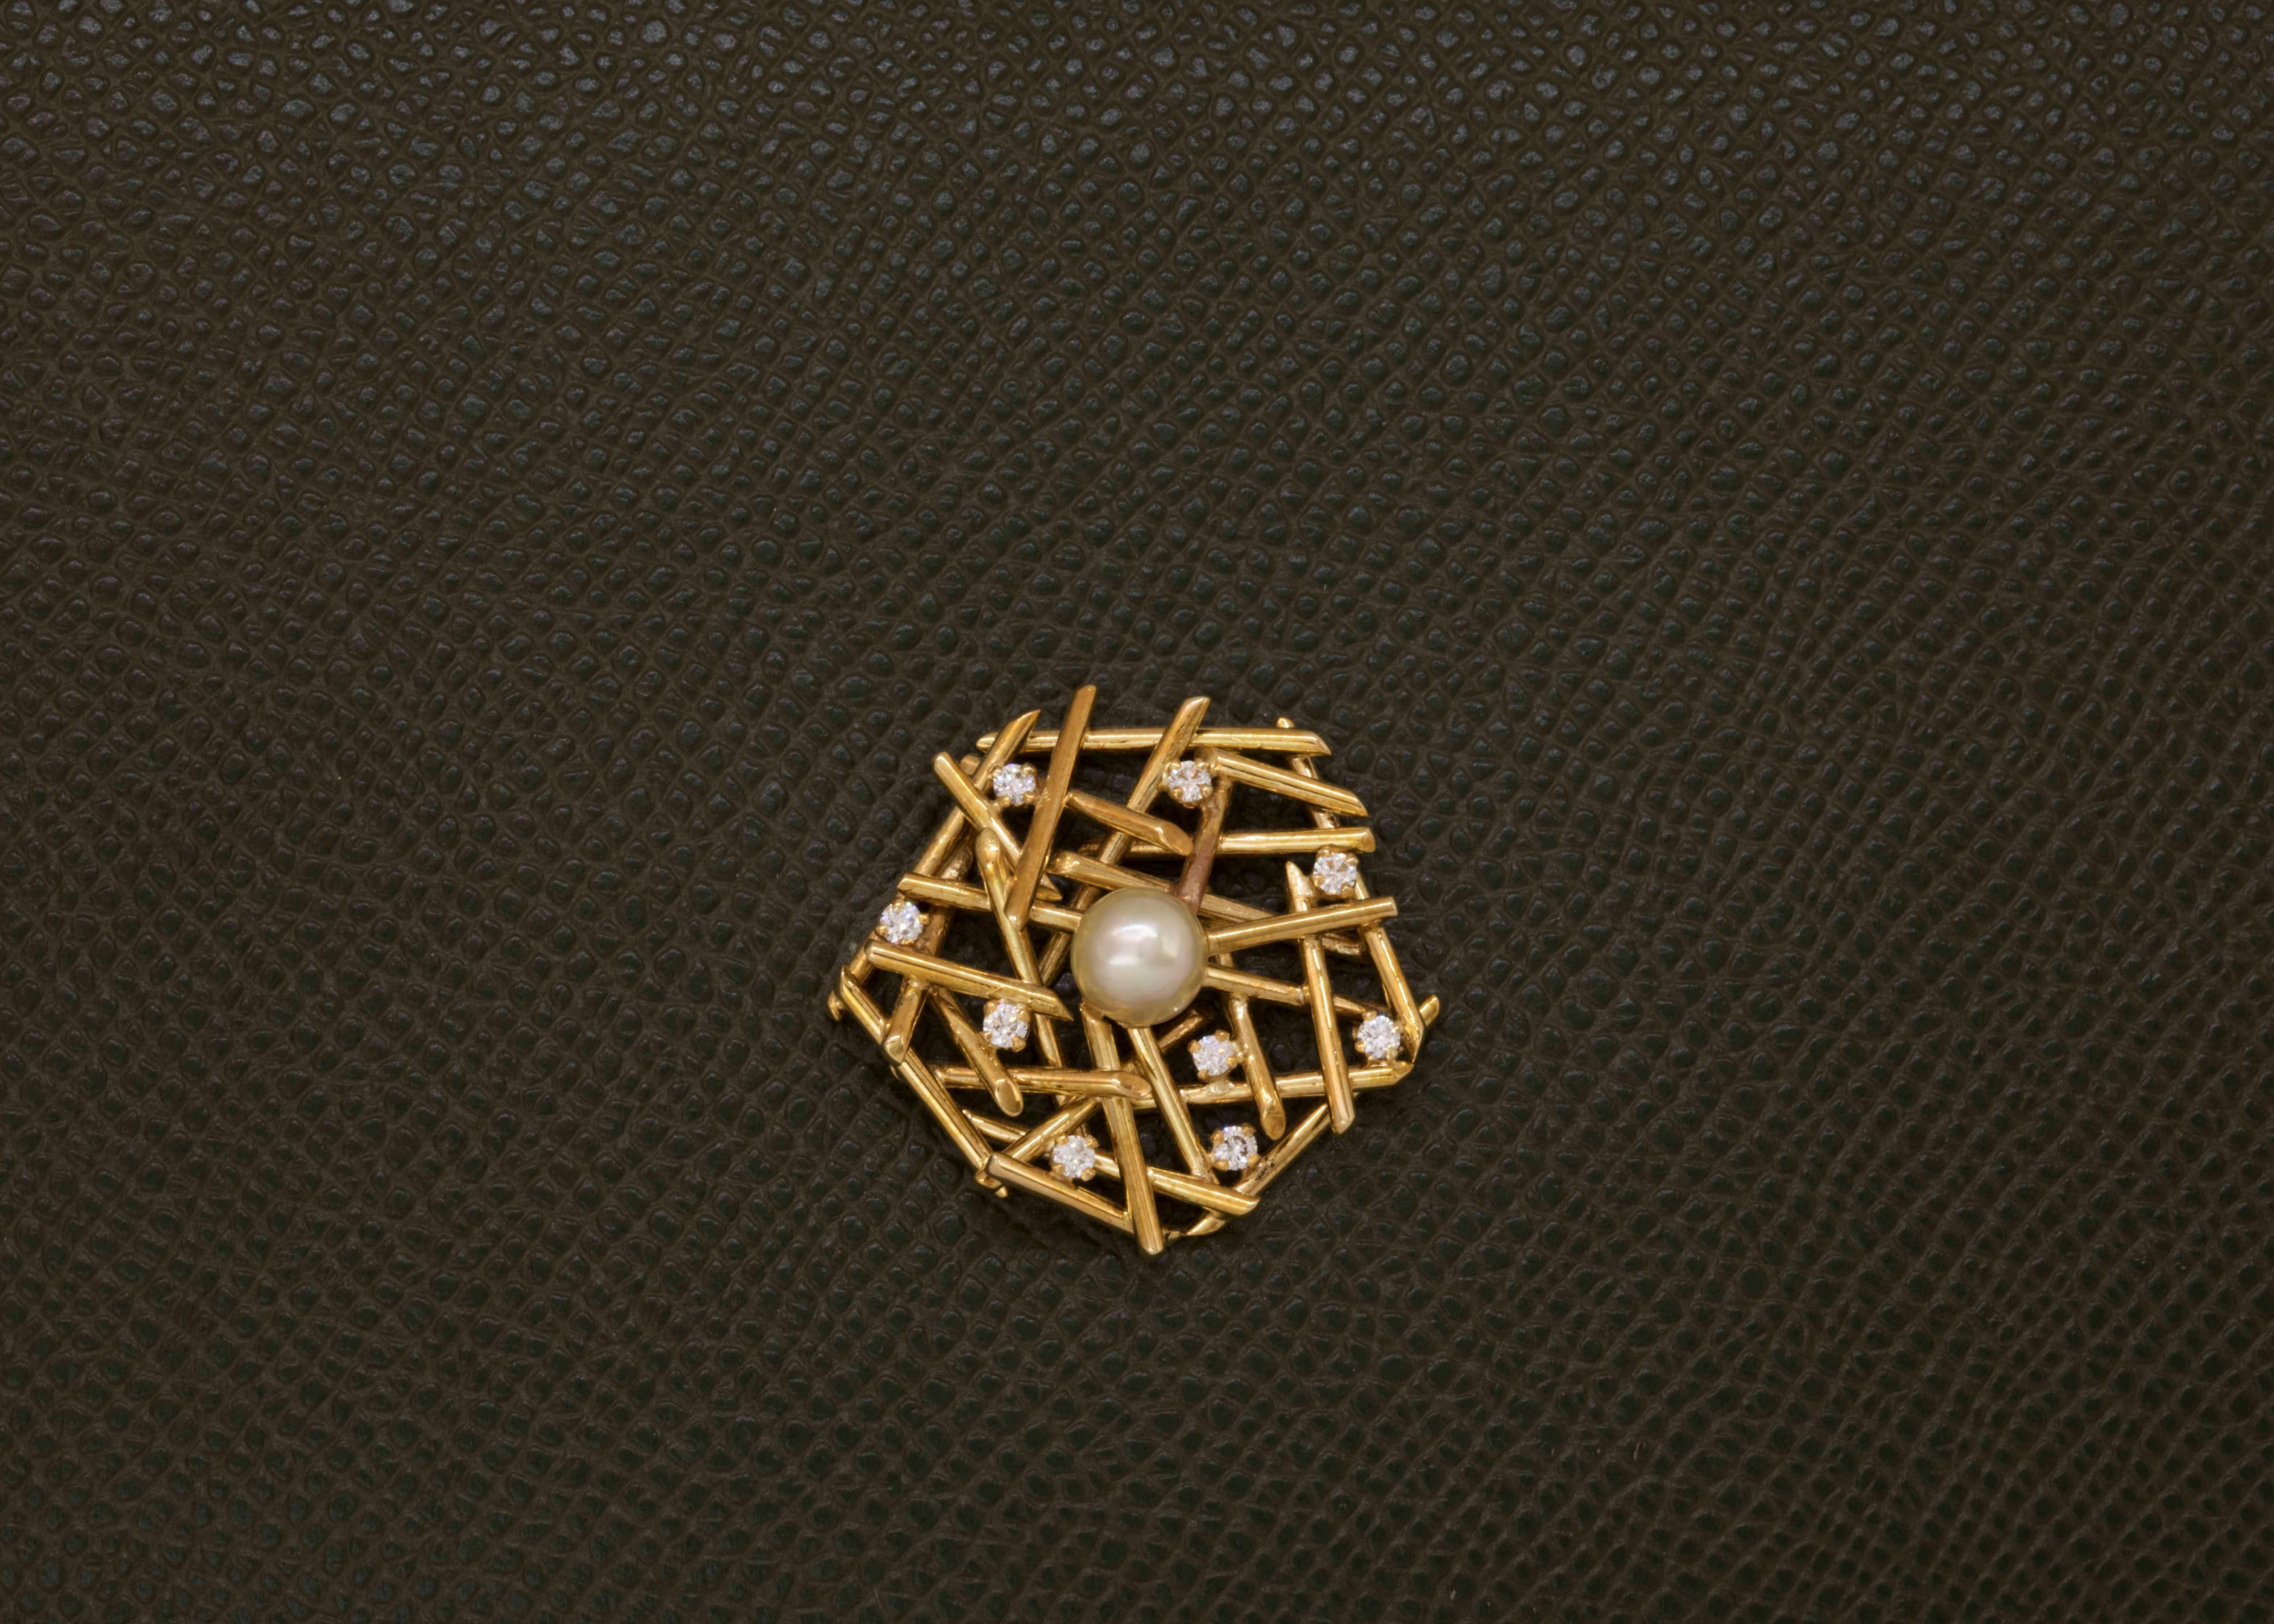 Sticks of 18k yellow gold are pilled together to create a gold nest.
The nest is studded with VS1 diamonds and a 1.78 ct. Pinctada Radiata natural Bahraini pearl.

All our clutches are made of genuine leather and are designed with a detachable gold